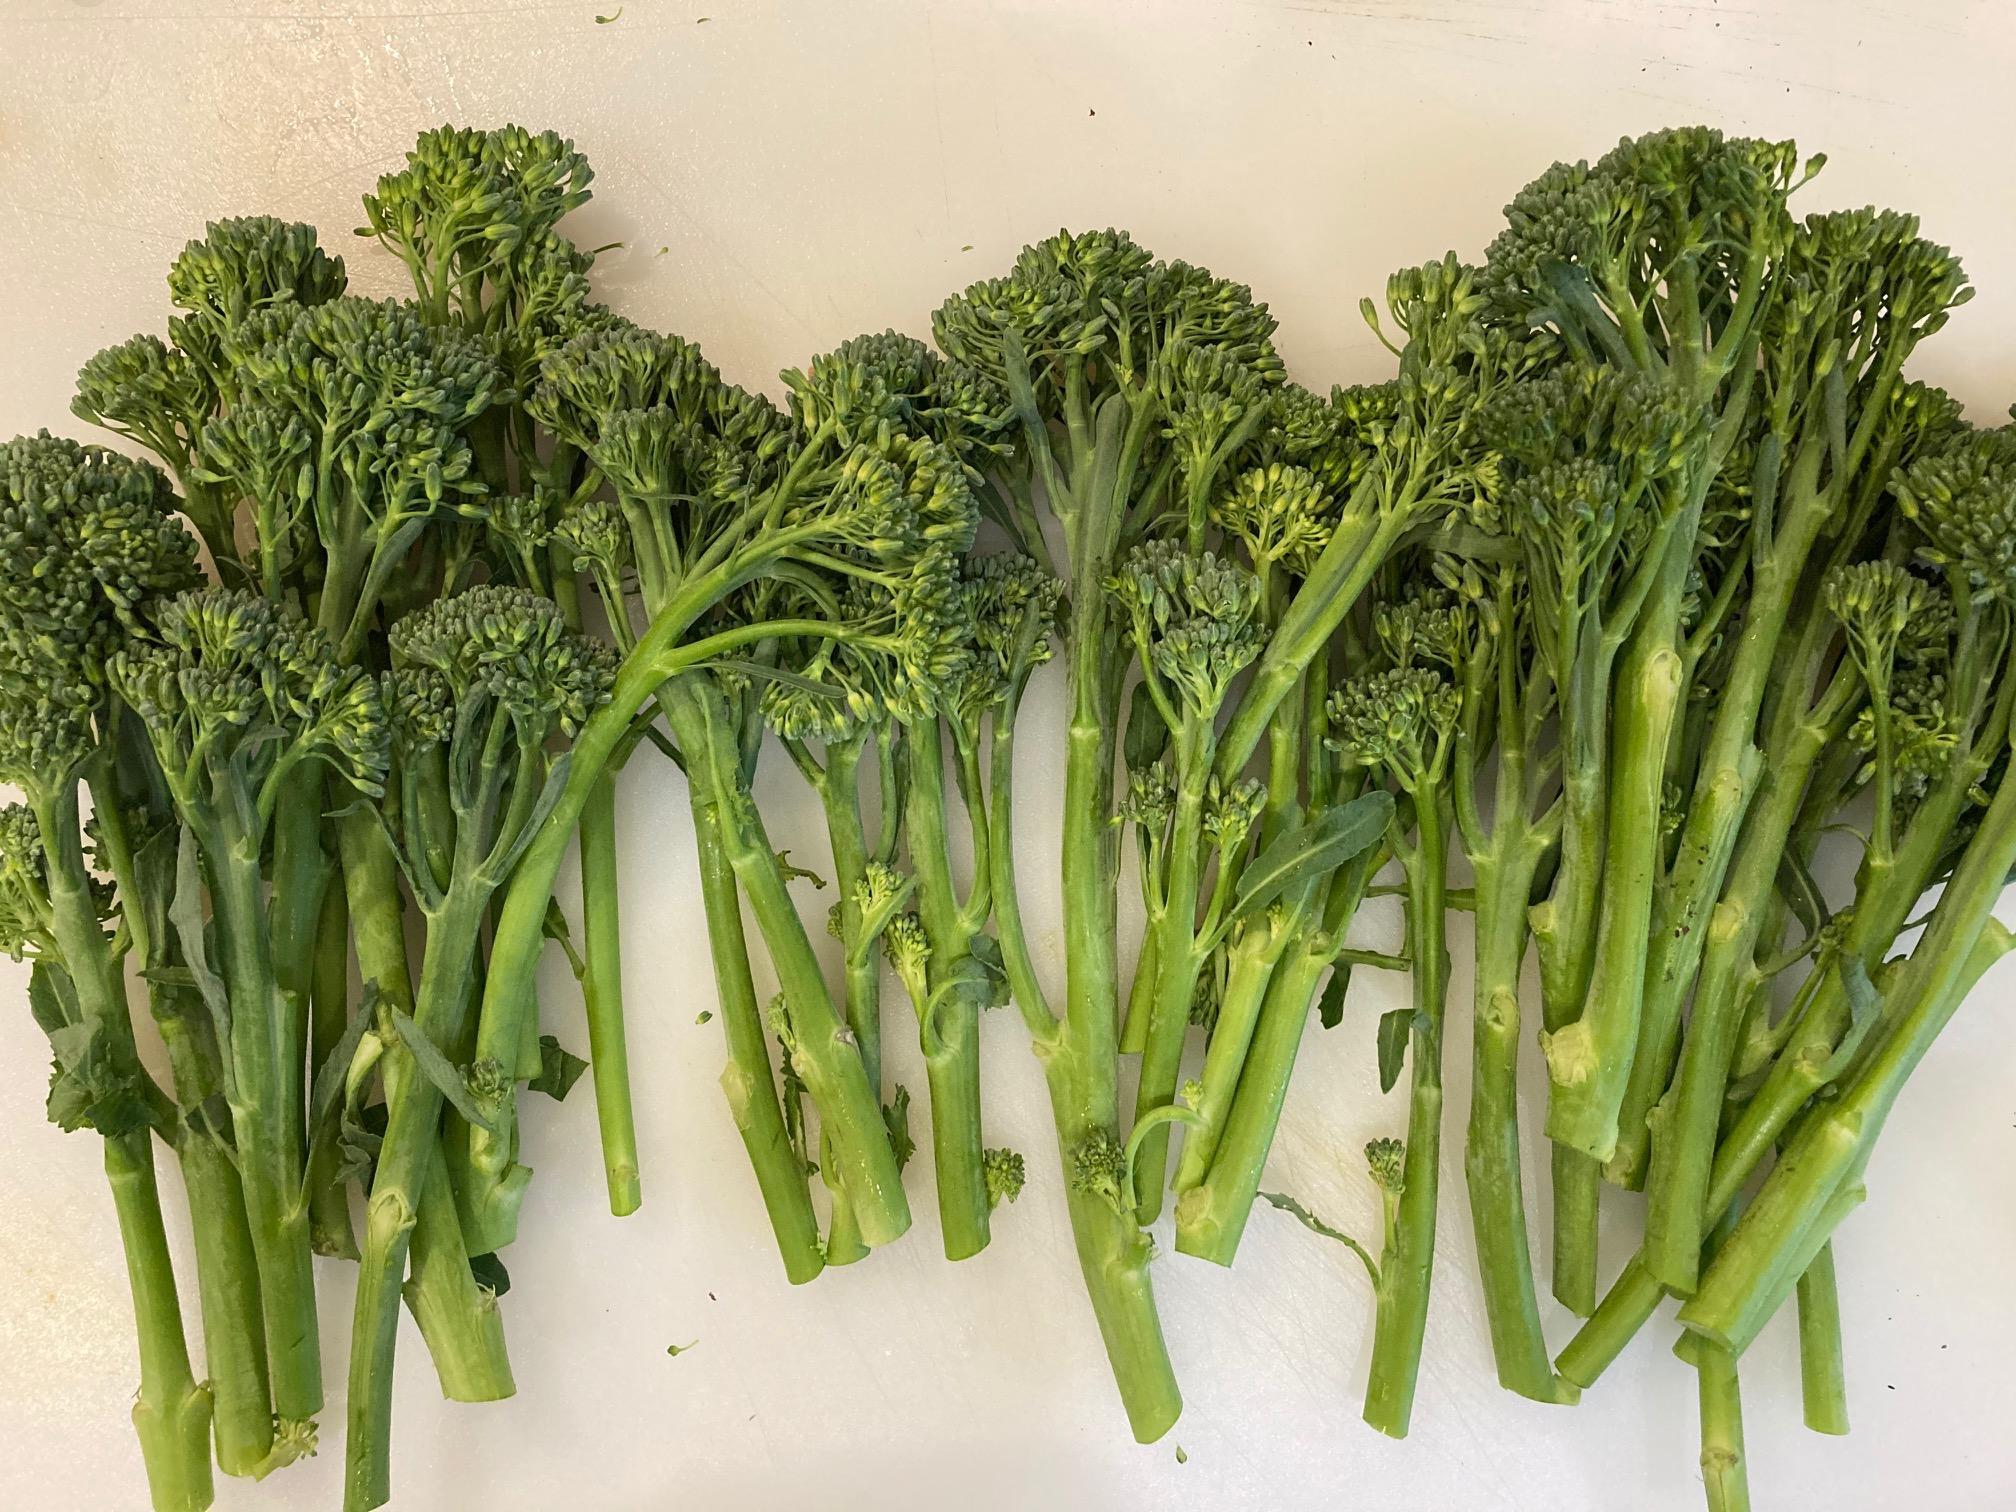 Blanched wild broccoli